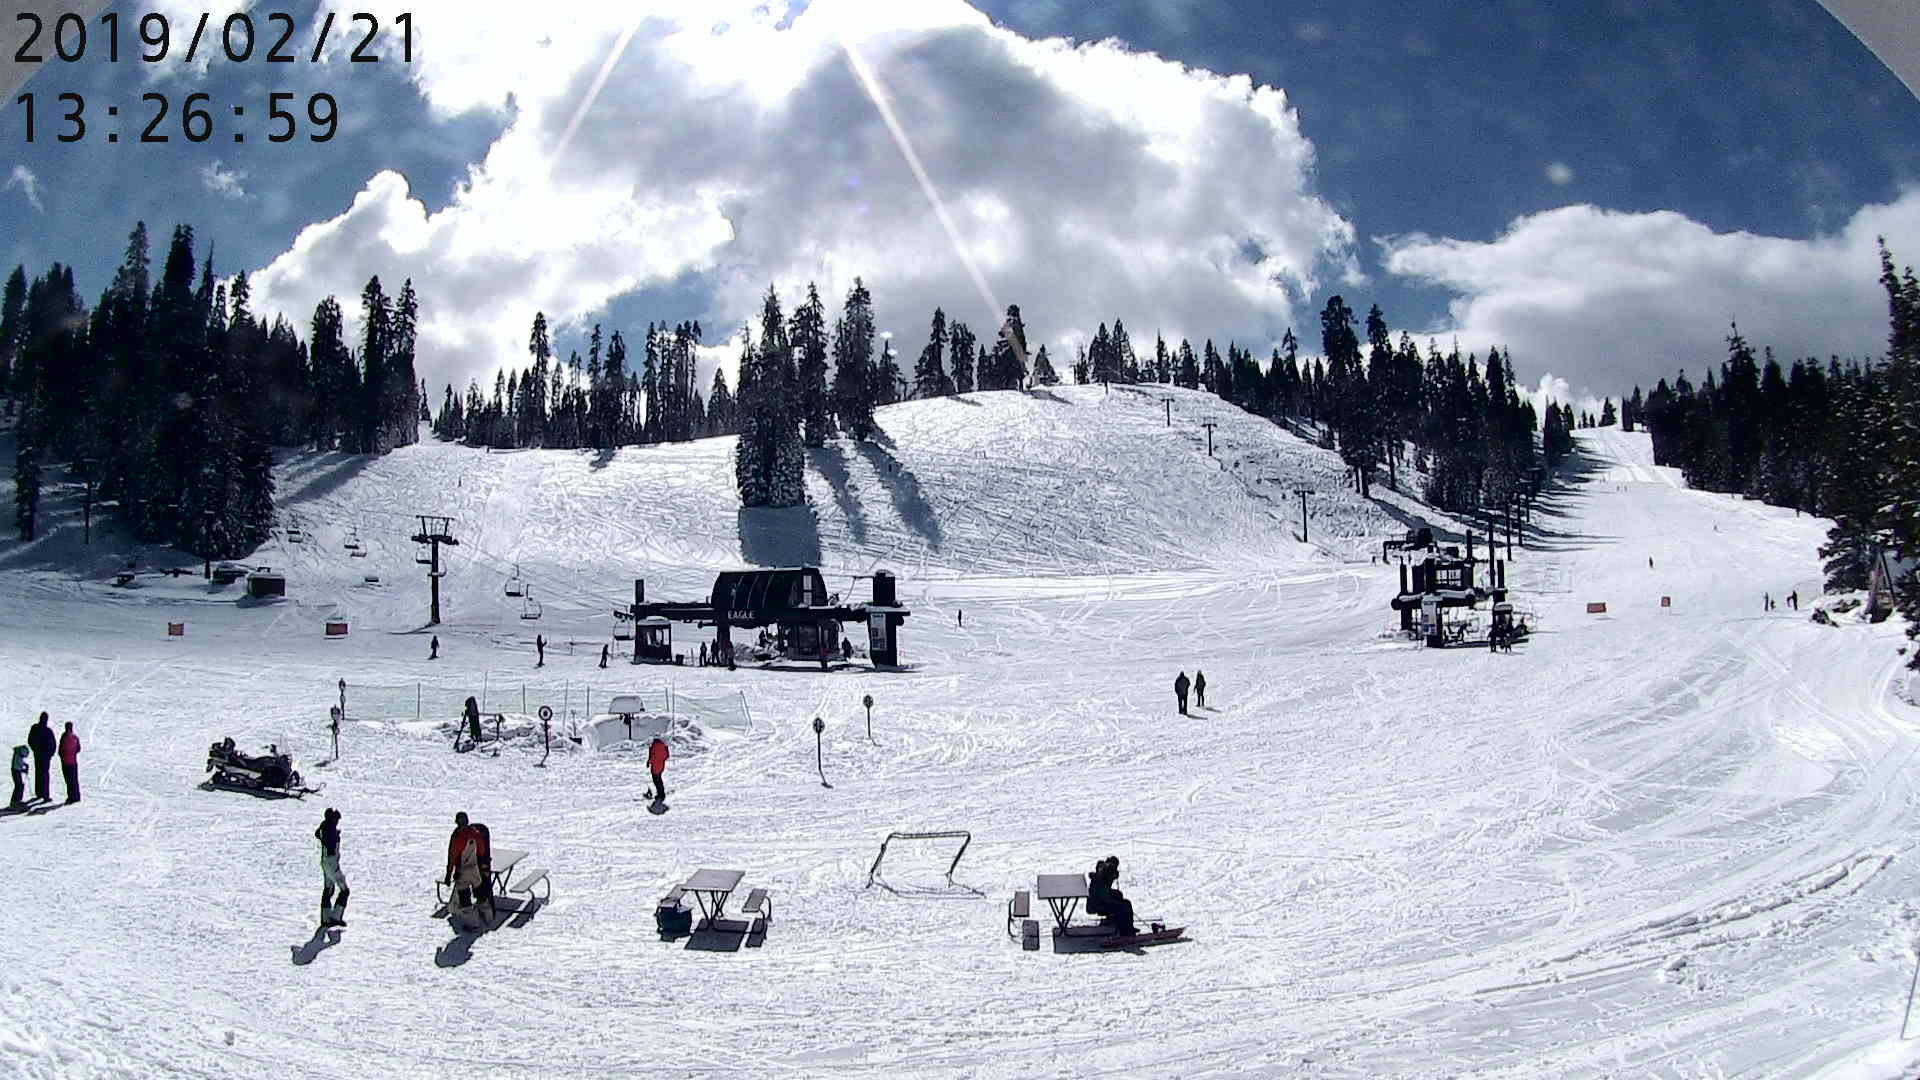 Actual webcam view of the ski area in February 2019